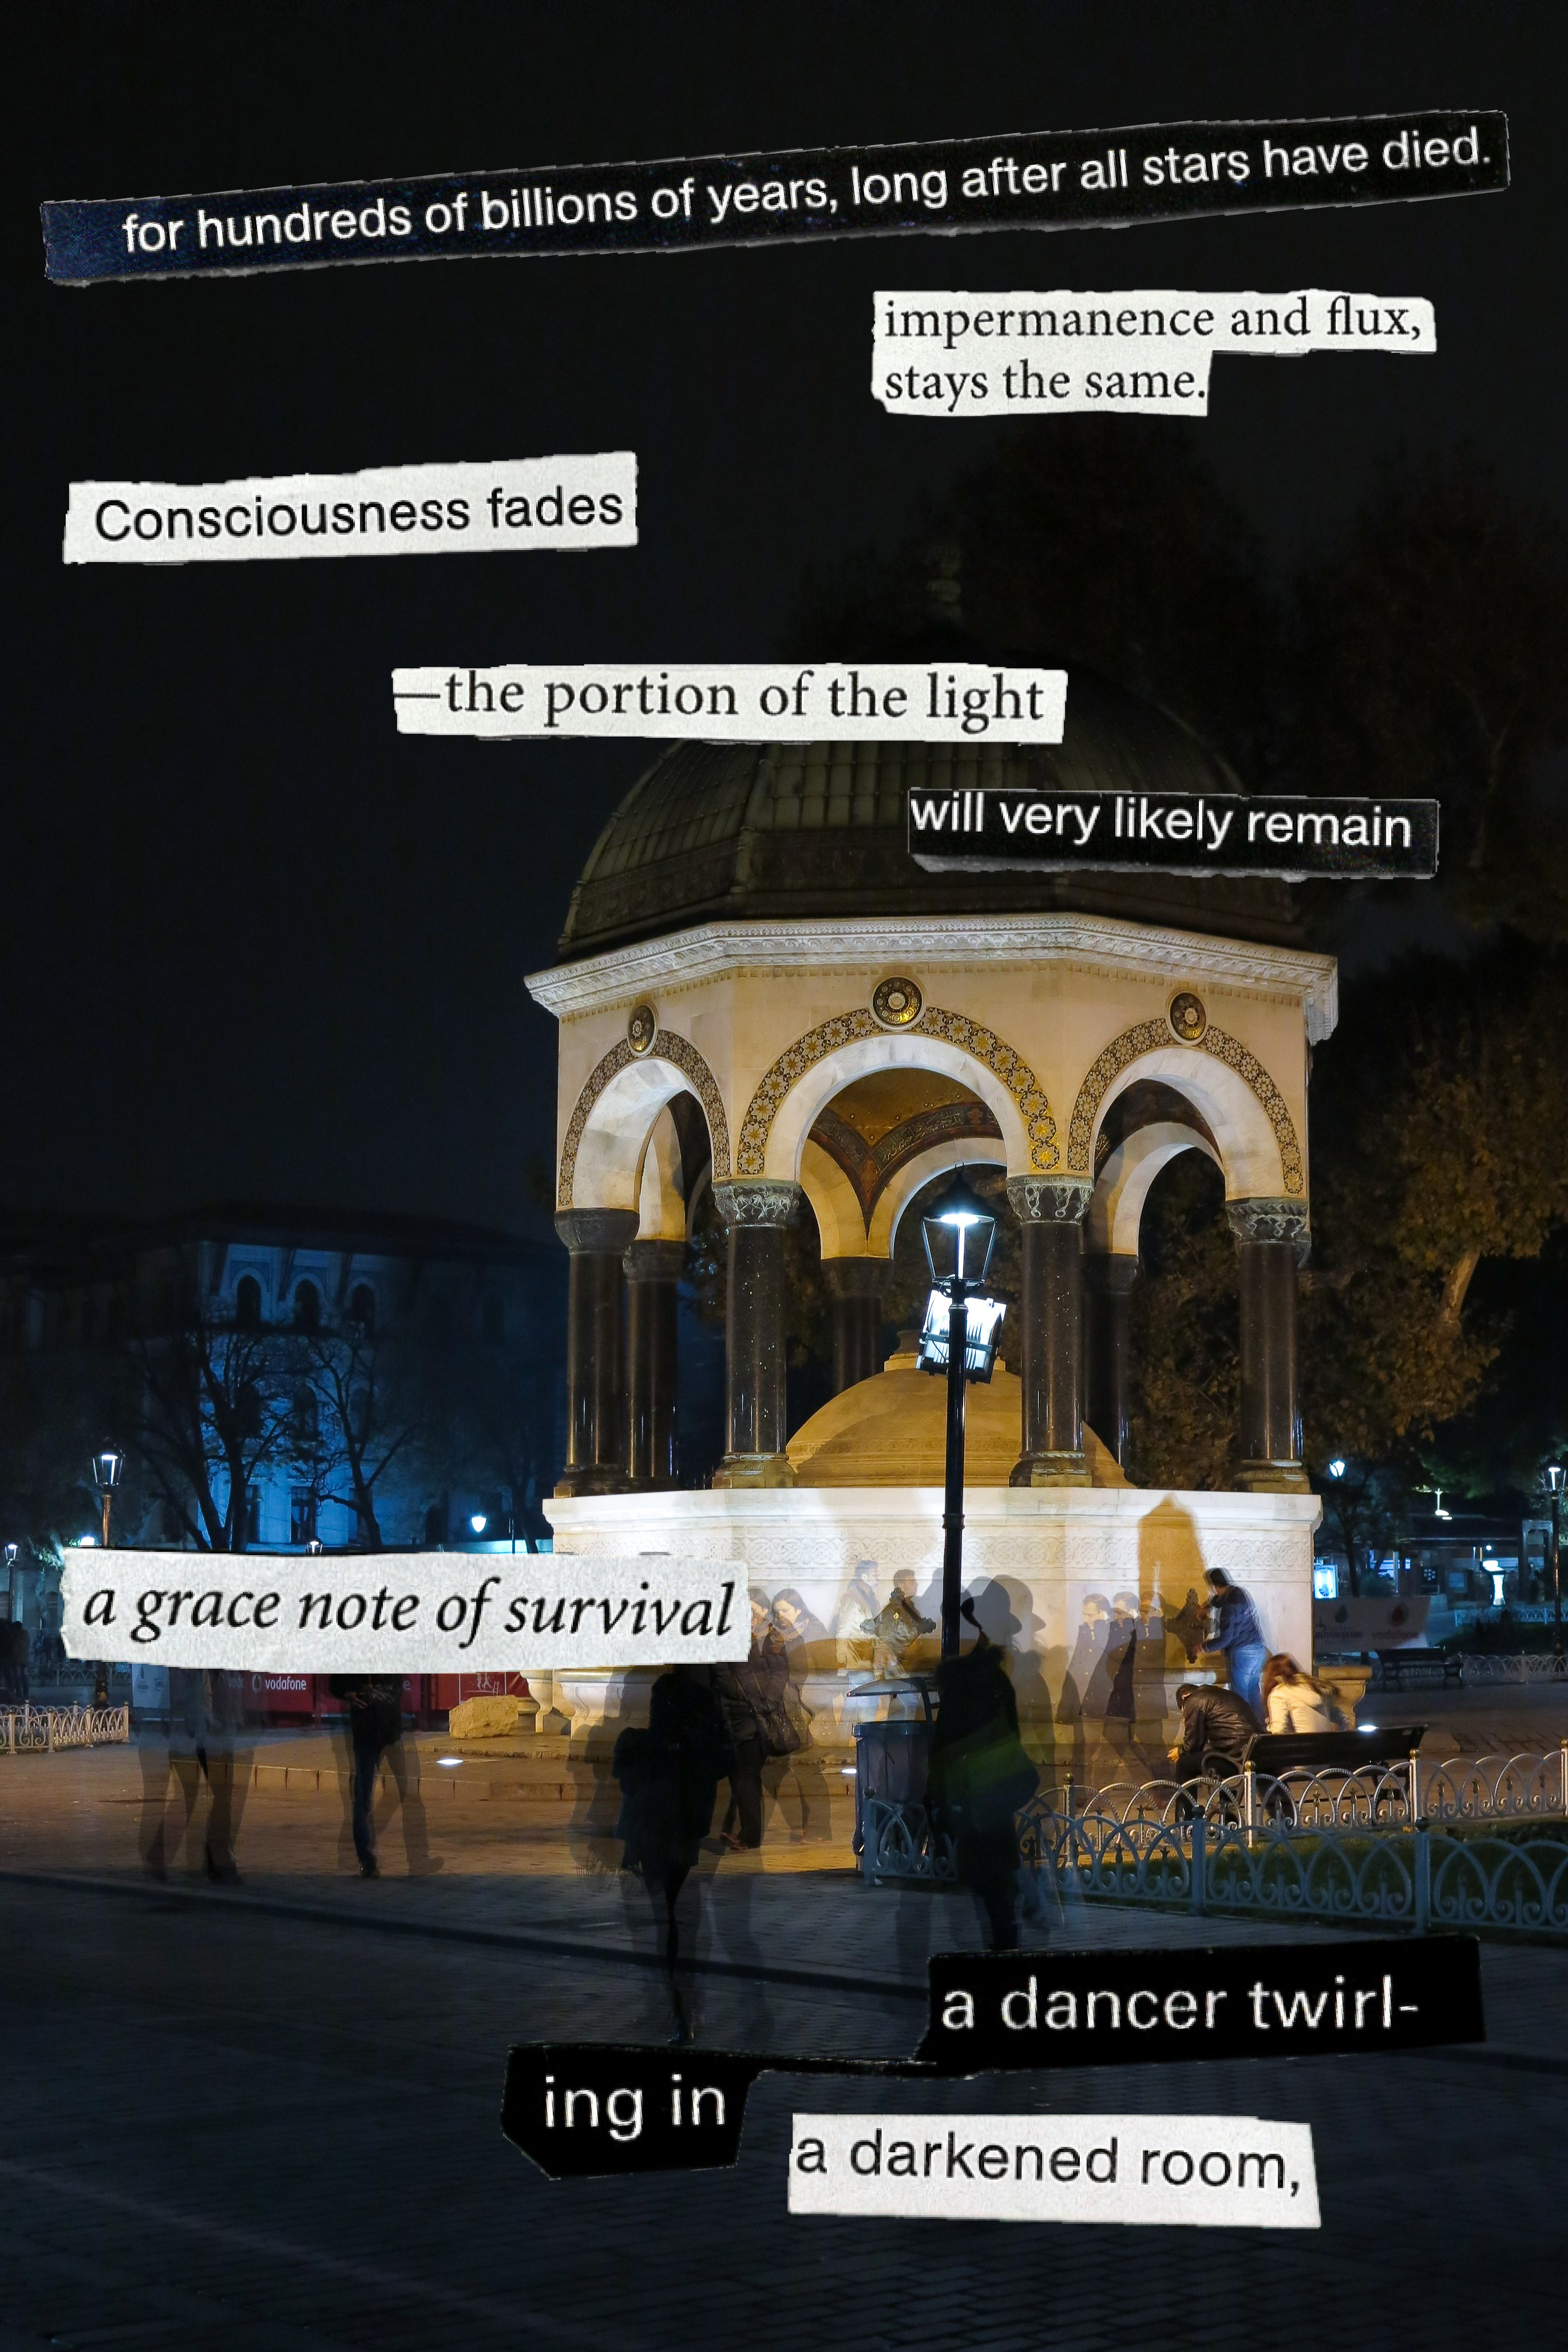 words pasted on photograph of night with lighted dome that says for hundreds of 
        			billions of years long after all stars have died impermanence and flux
        			stays the same Consciousness fades the portion of the light will very
        			likely remain a grace note of survivala dancer twirling in a darkened room